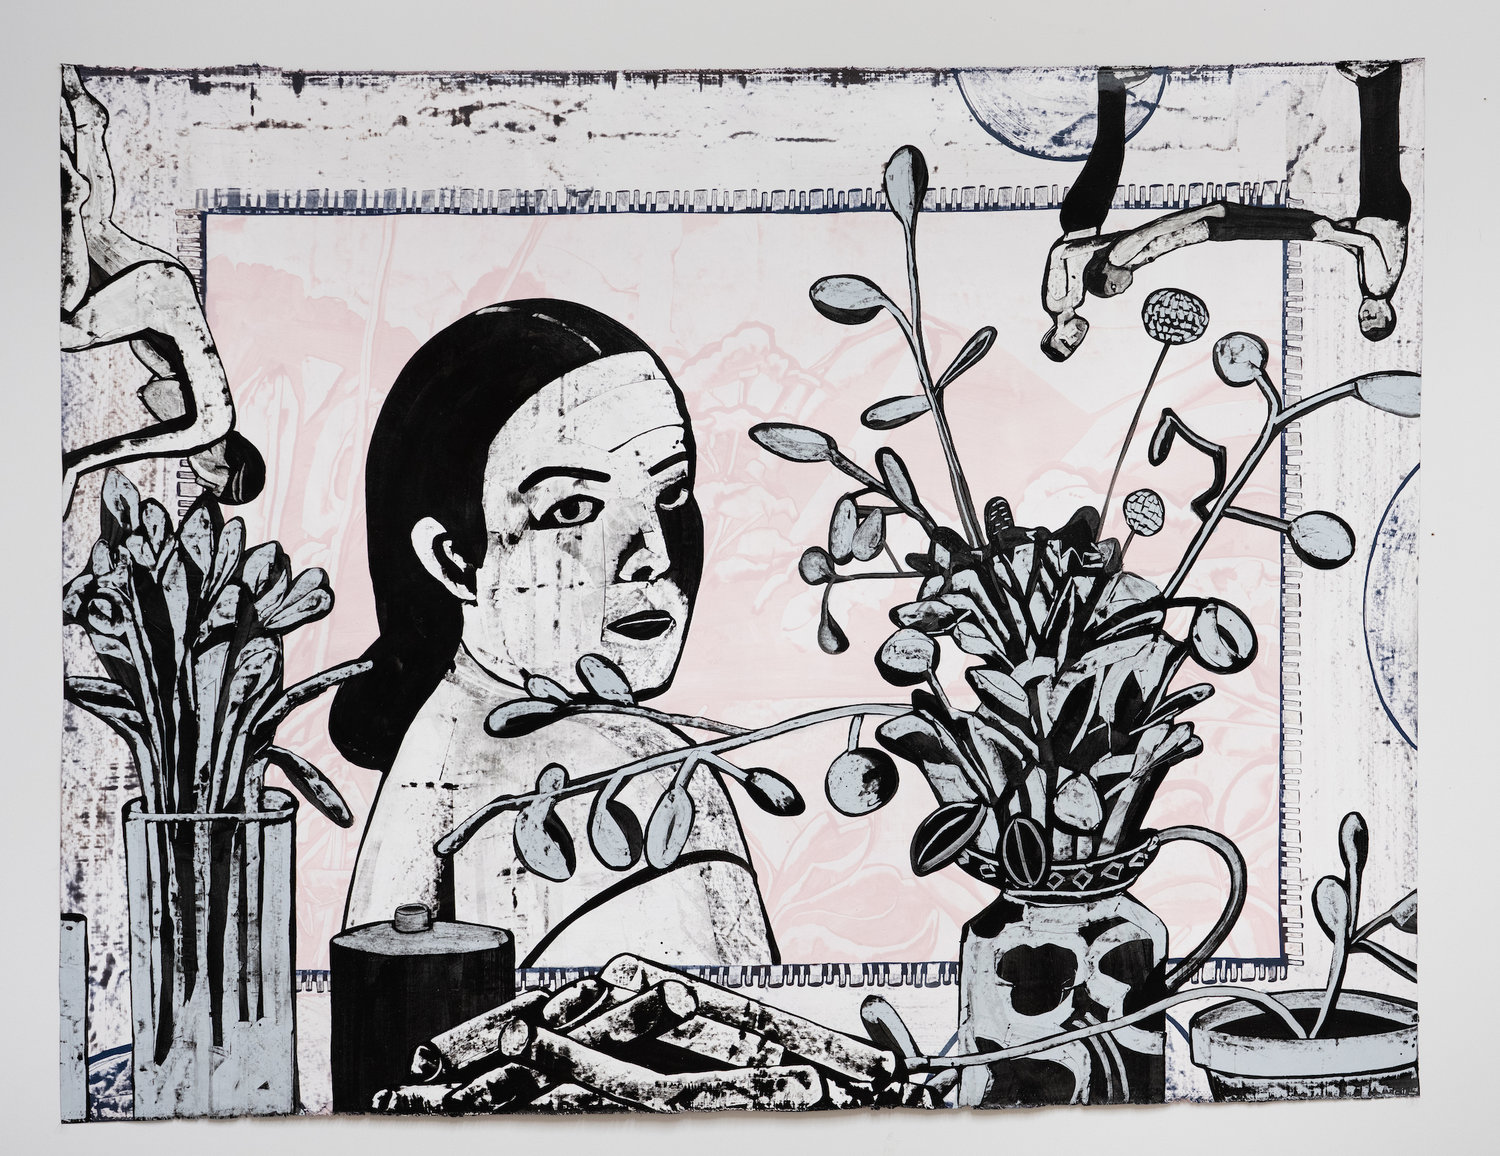 "Laeree with Flowers," by Joey Fauerso